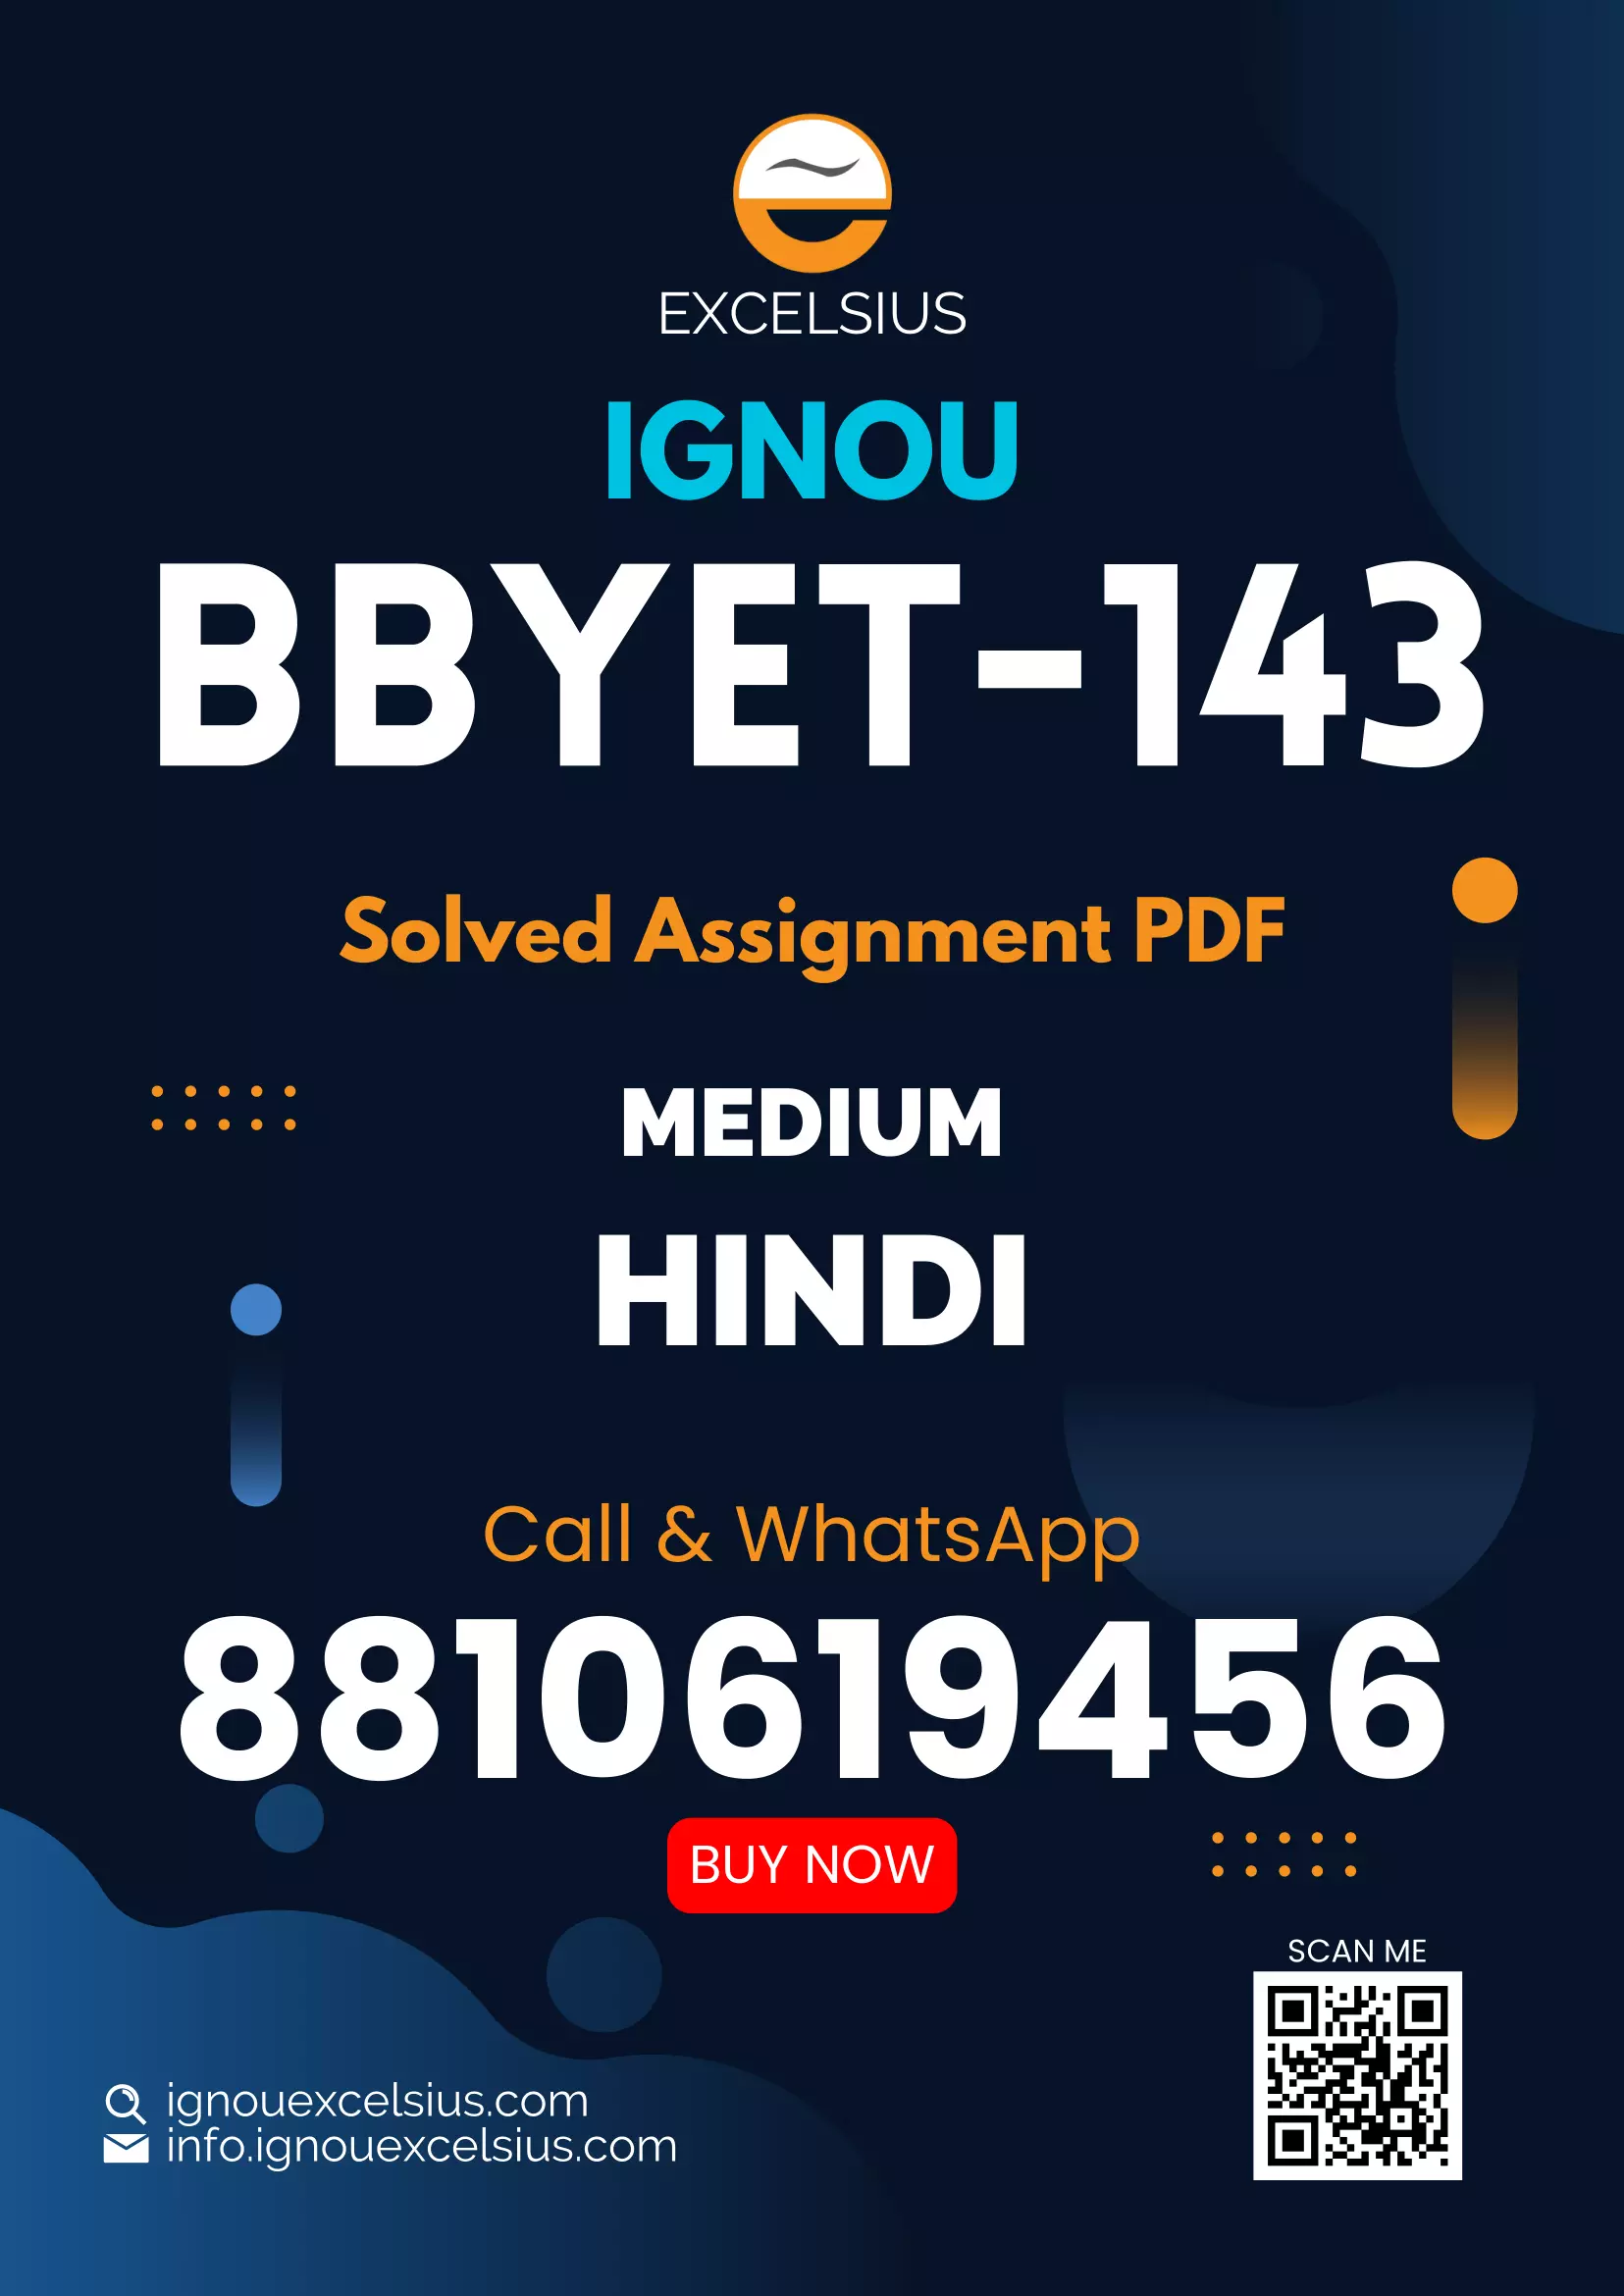 IGNOU BBYET-143 - Economic Botany and Plant Biotechnology, Latest Solved Assignment-January 2024 - December 2024